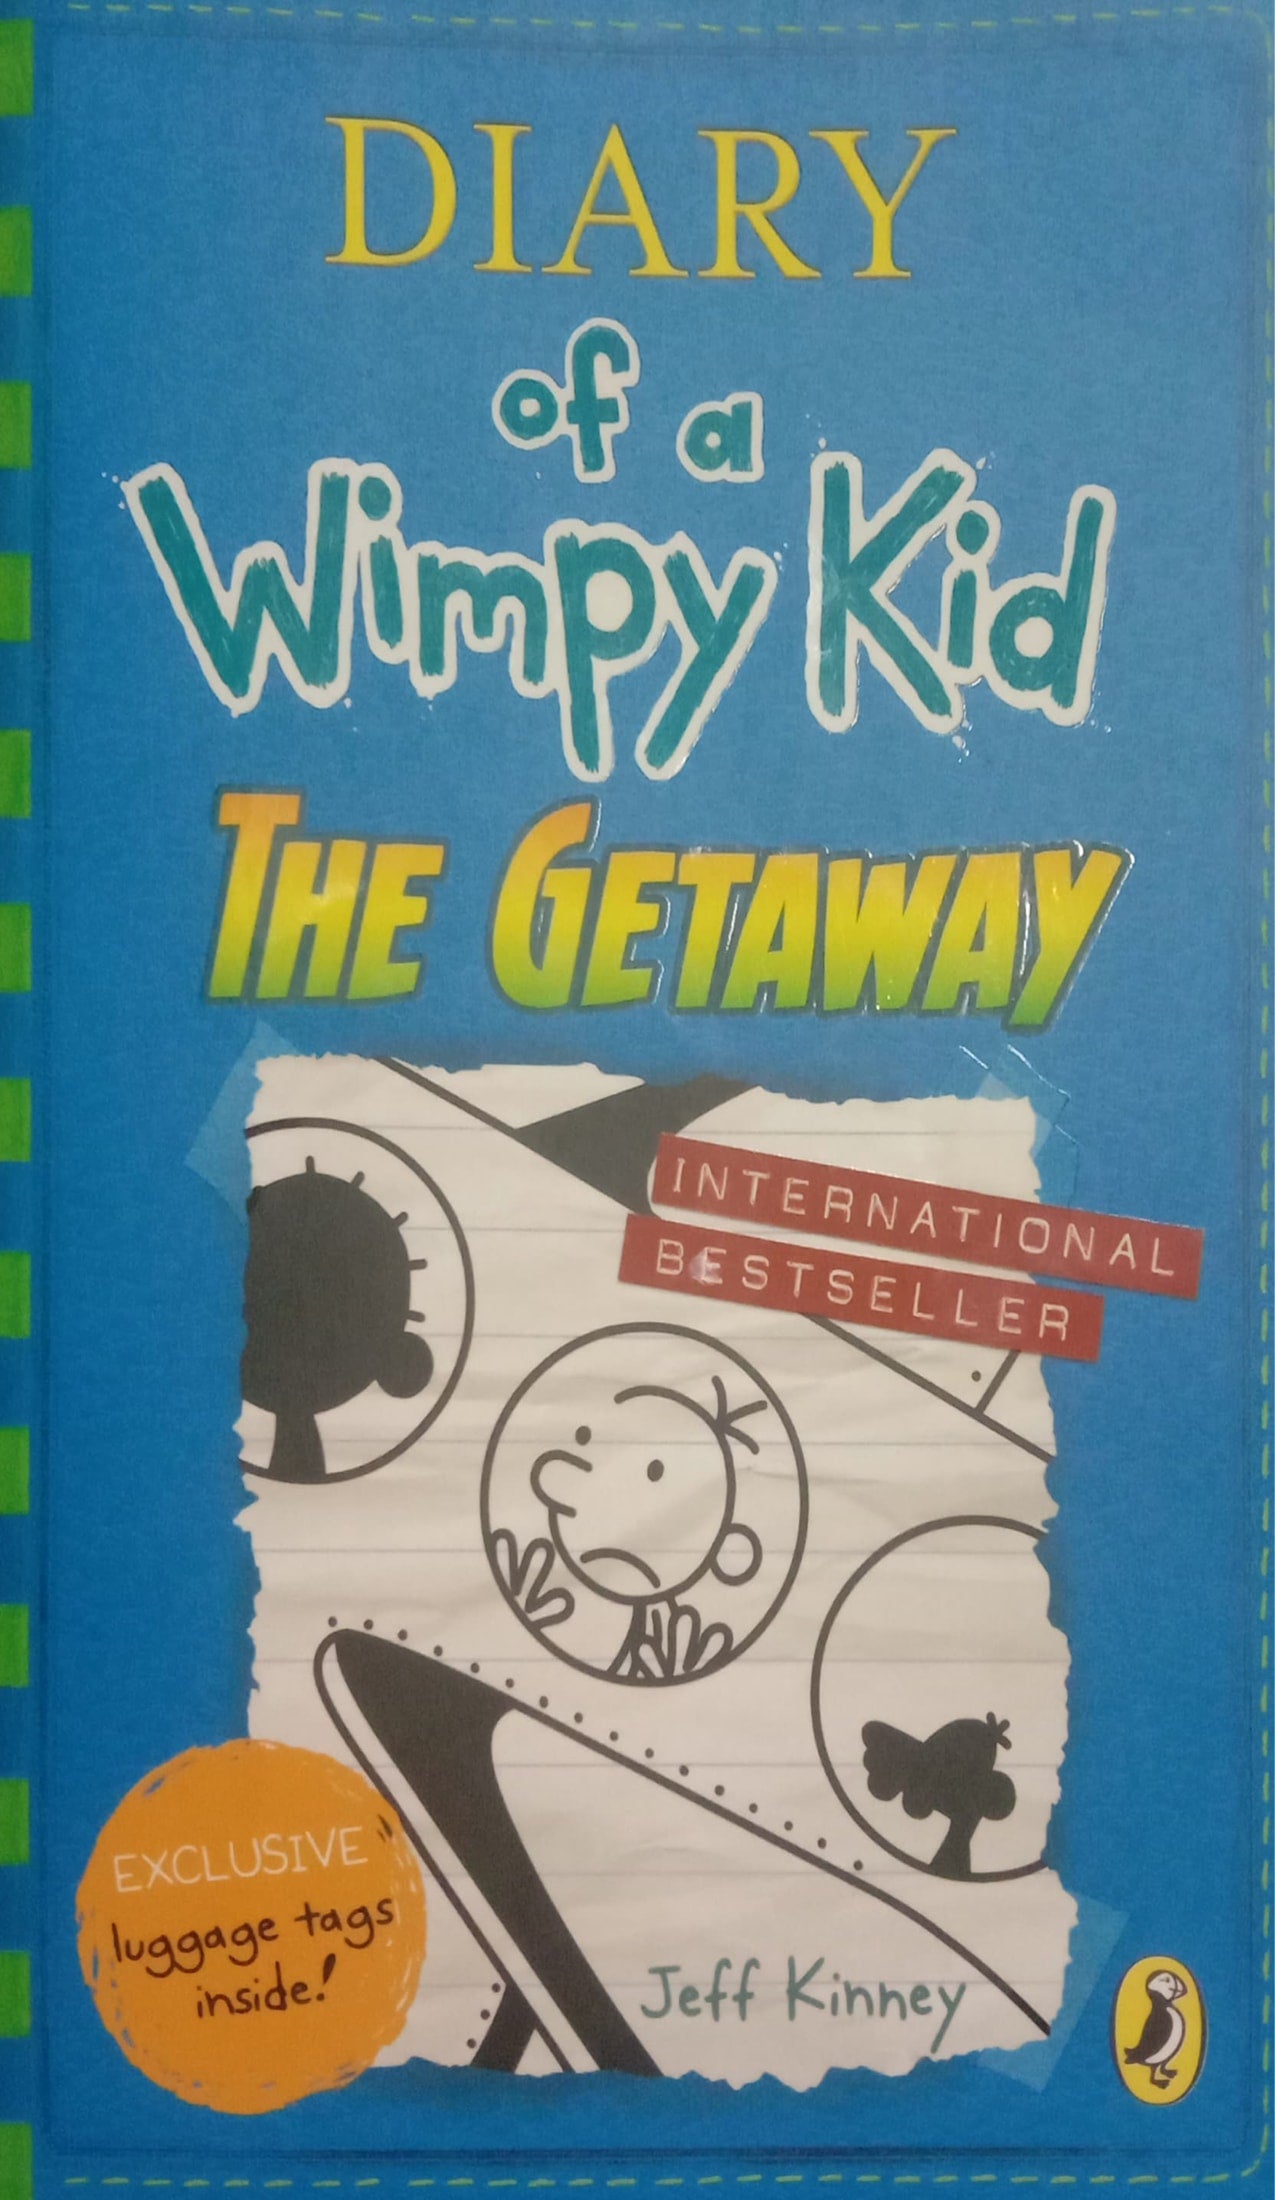 DIARY OF A WIMPY KID - THE GETAWAY